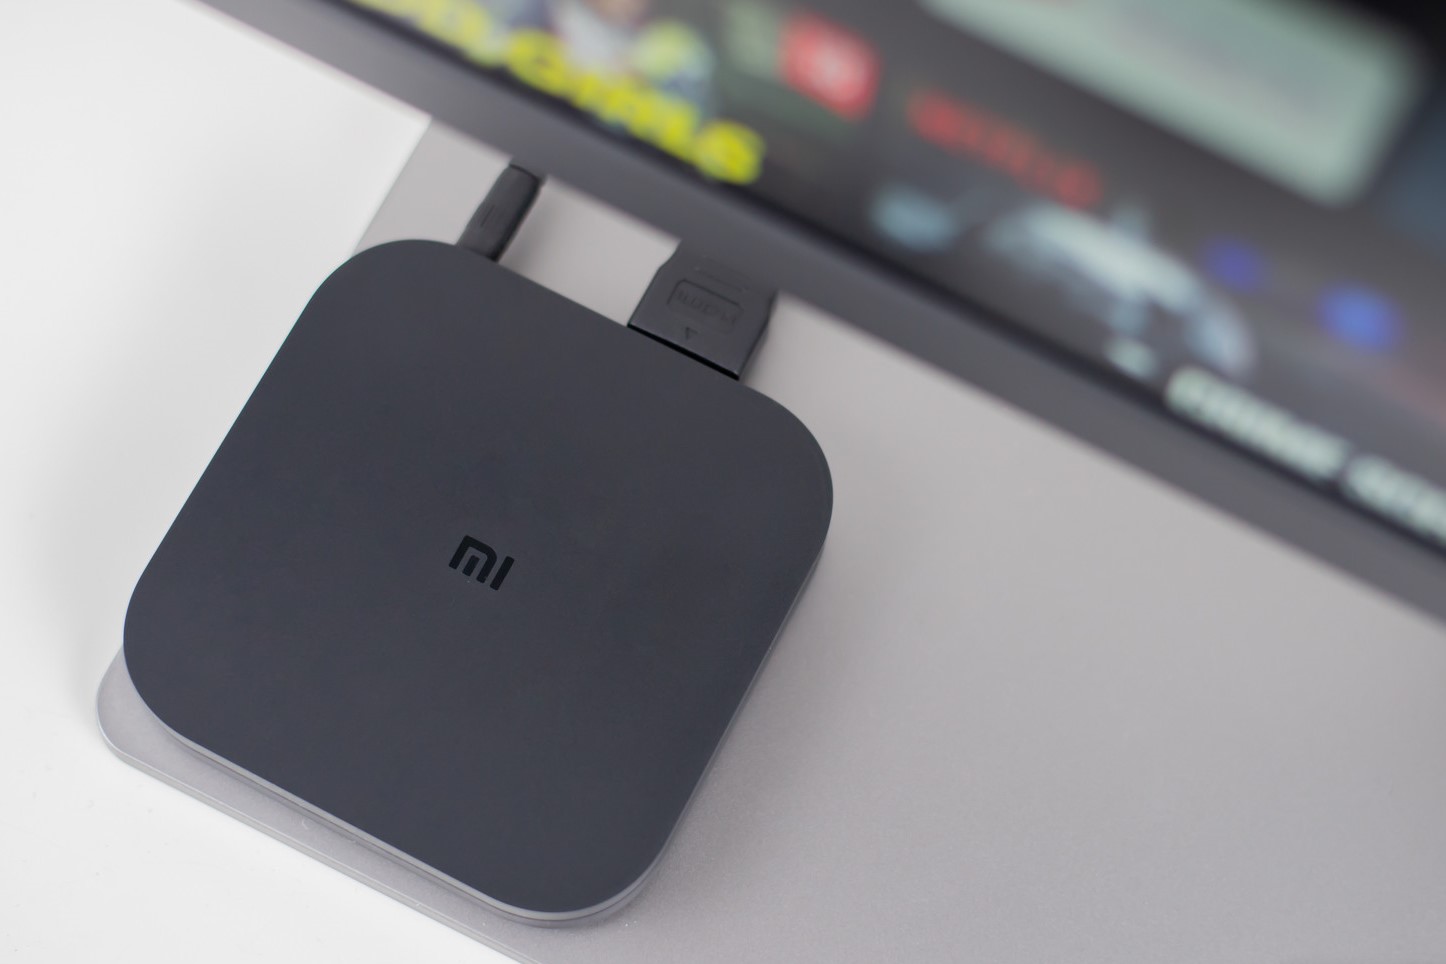 Unblocking Youku On Xiaomi Box: Step-by-Step Guide